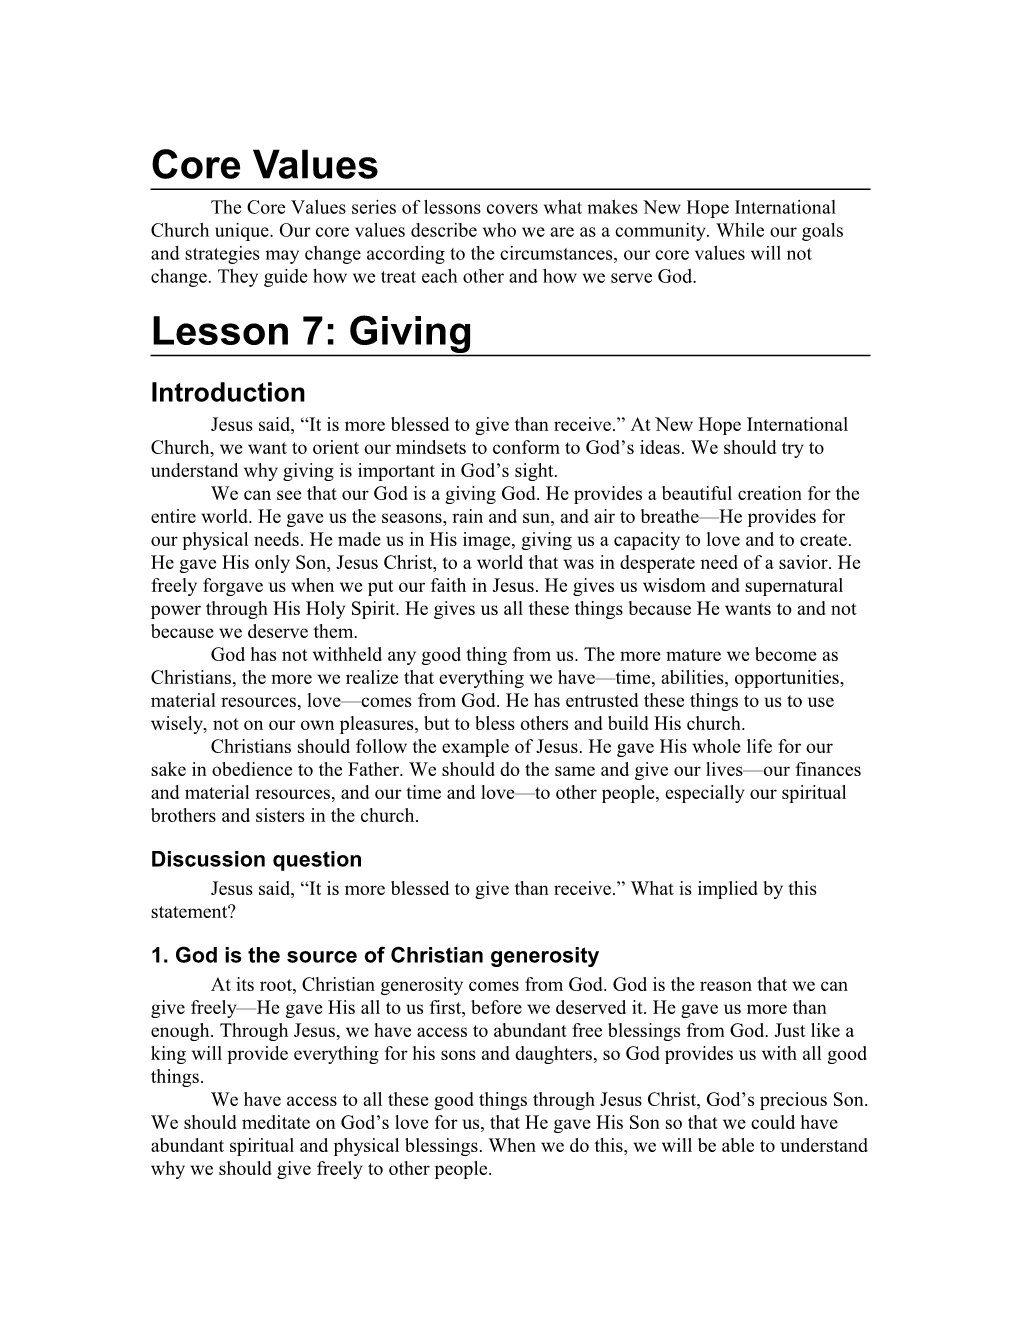 Core Values Lessons: the Word of God